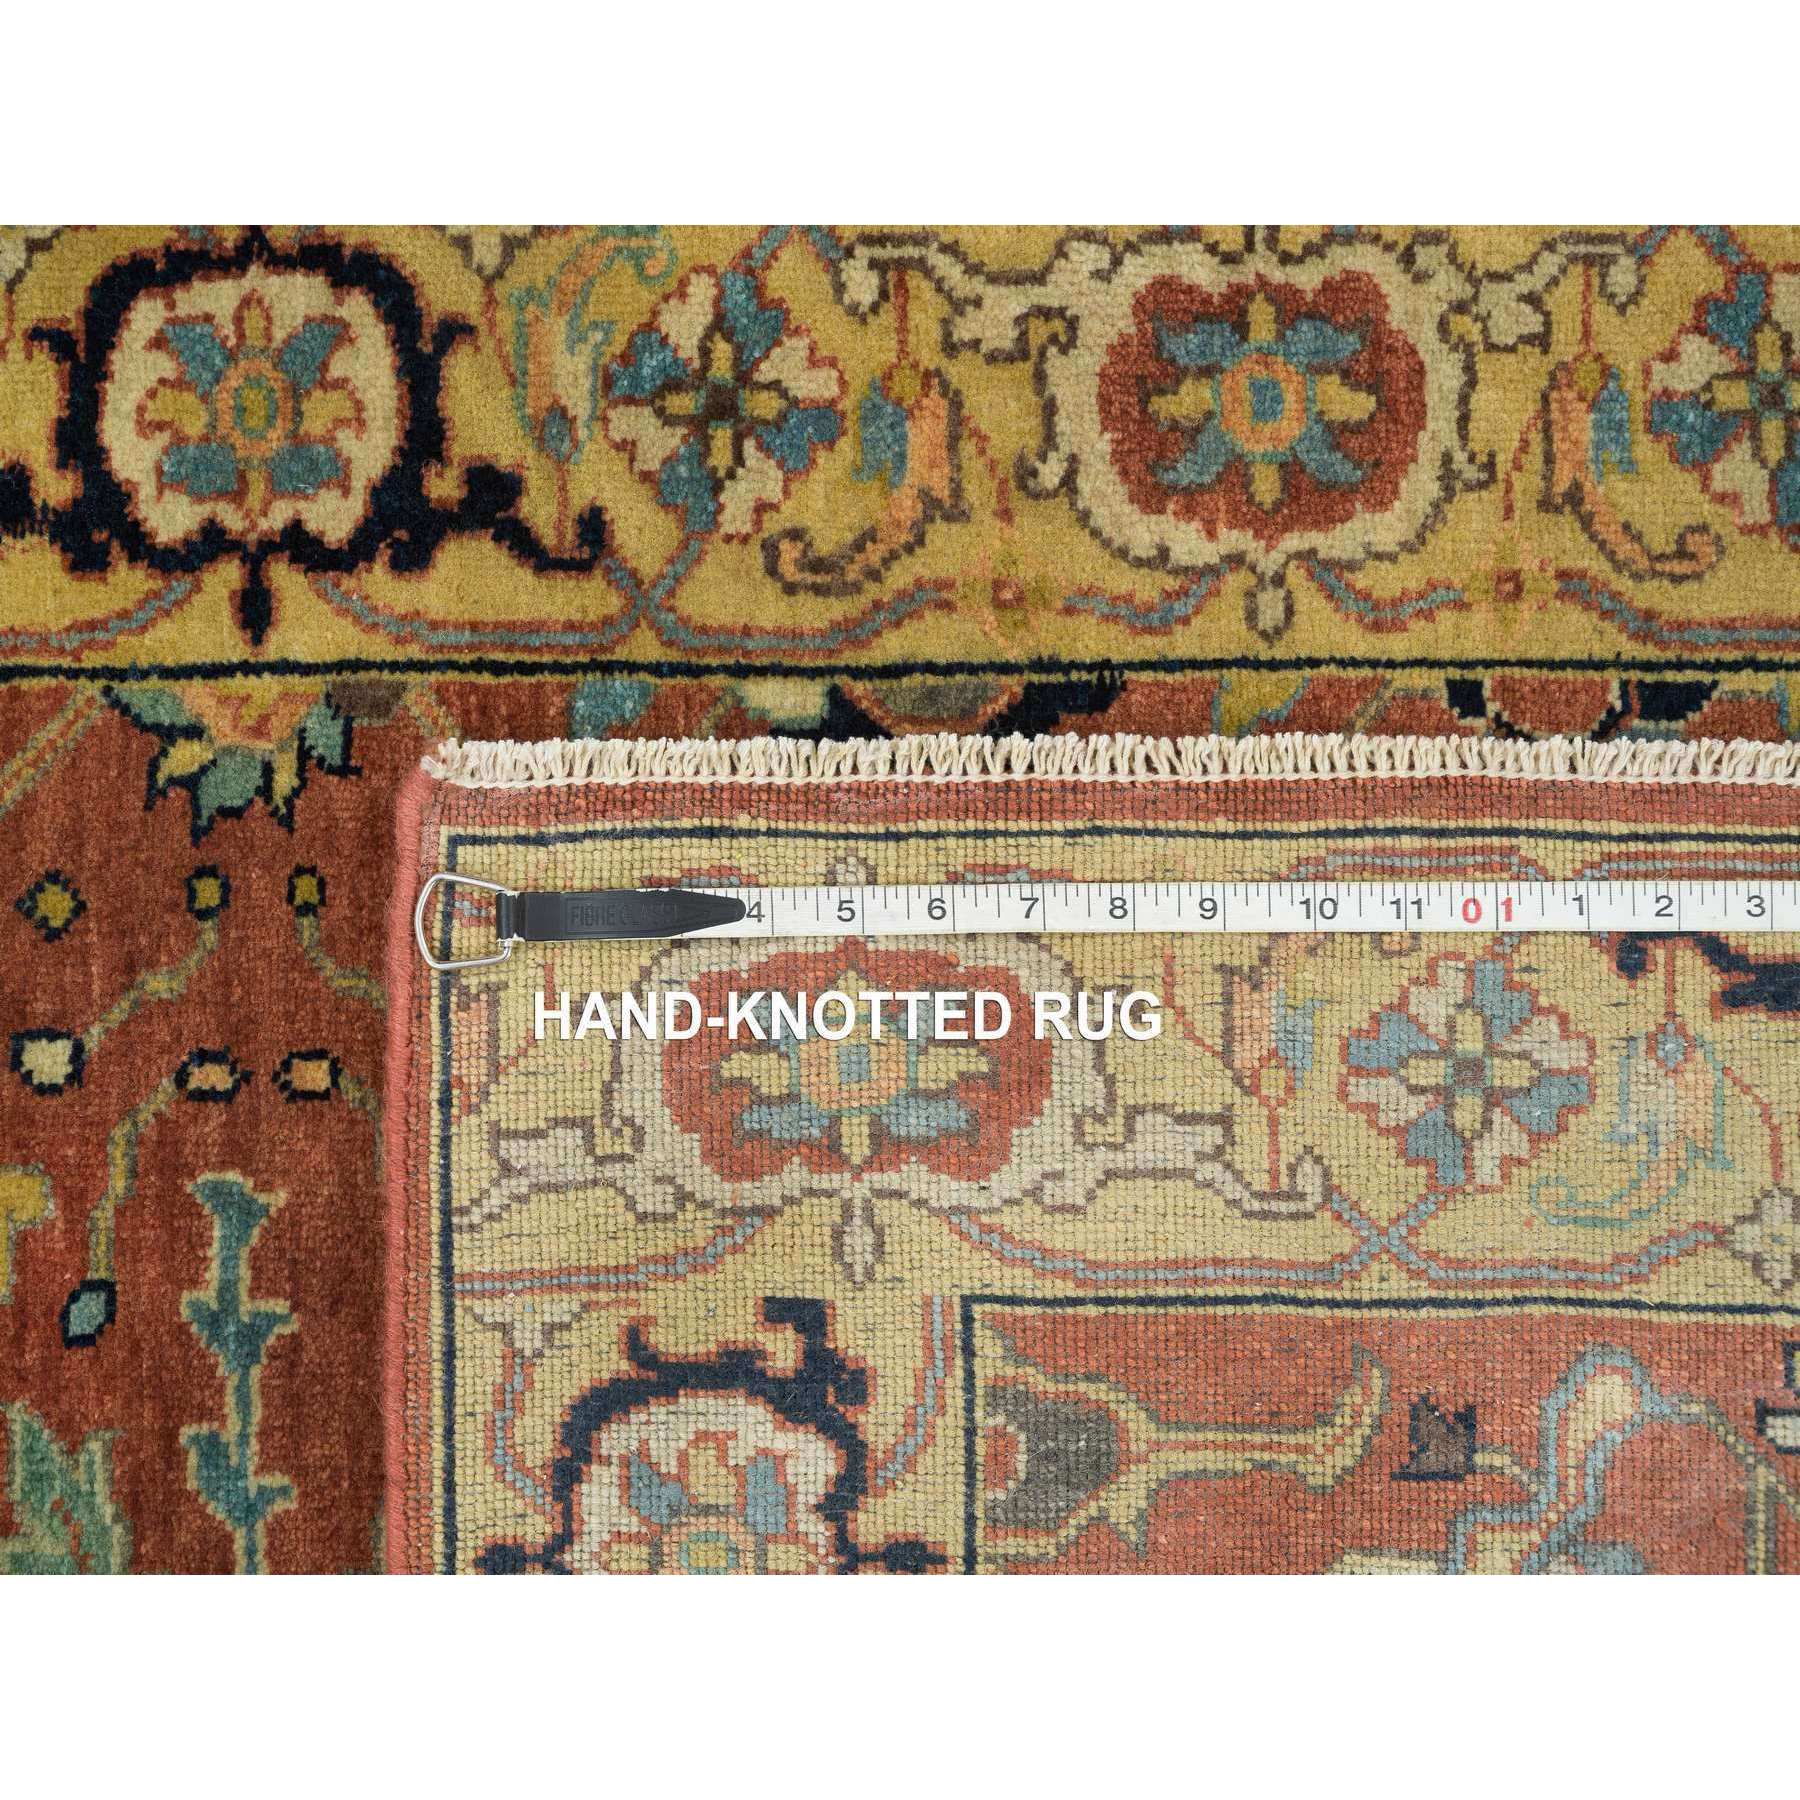 3'1"x5'3" Red with Yellow, Antiqued Fine Heriz Re-Creation, Natural Dyes, Organic Wool, Plush Pile, Hand Woven Oriental Rug 